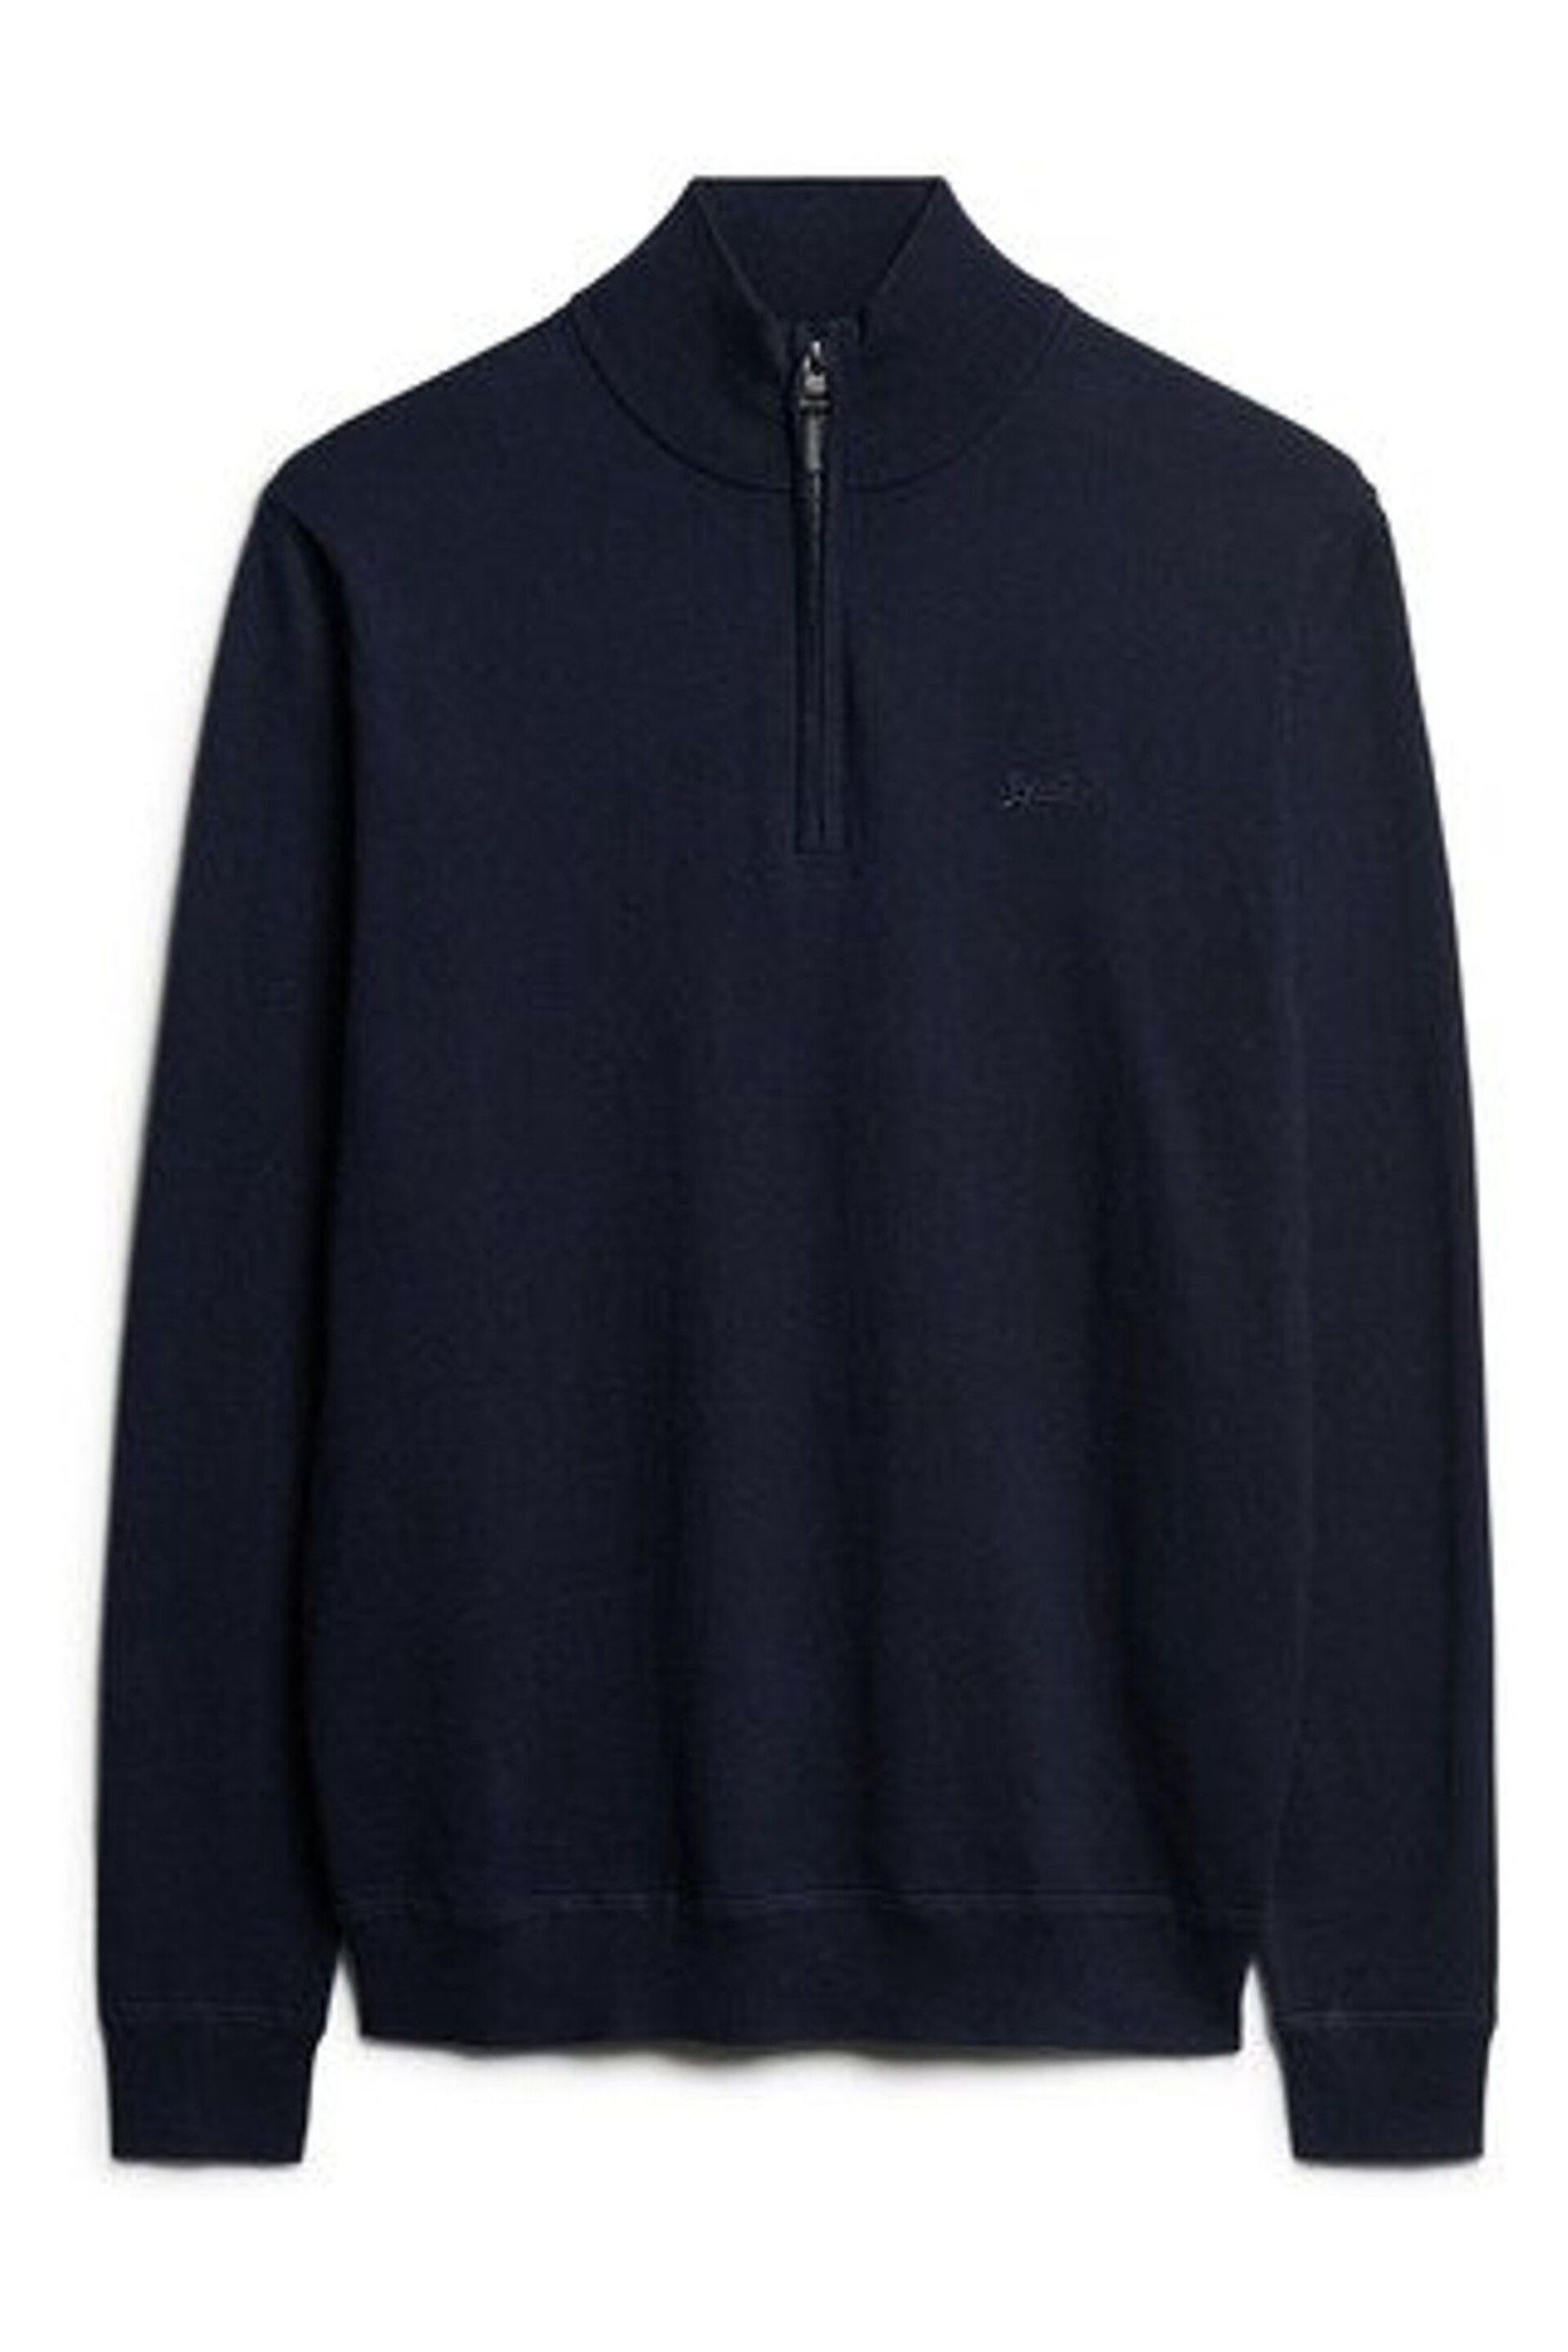 Superdry Blue Henley Cotton Cashmere Knitted Jumper - Image 3 of 6